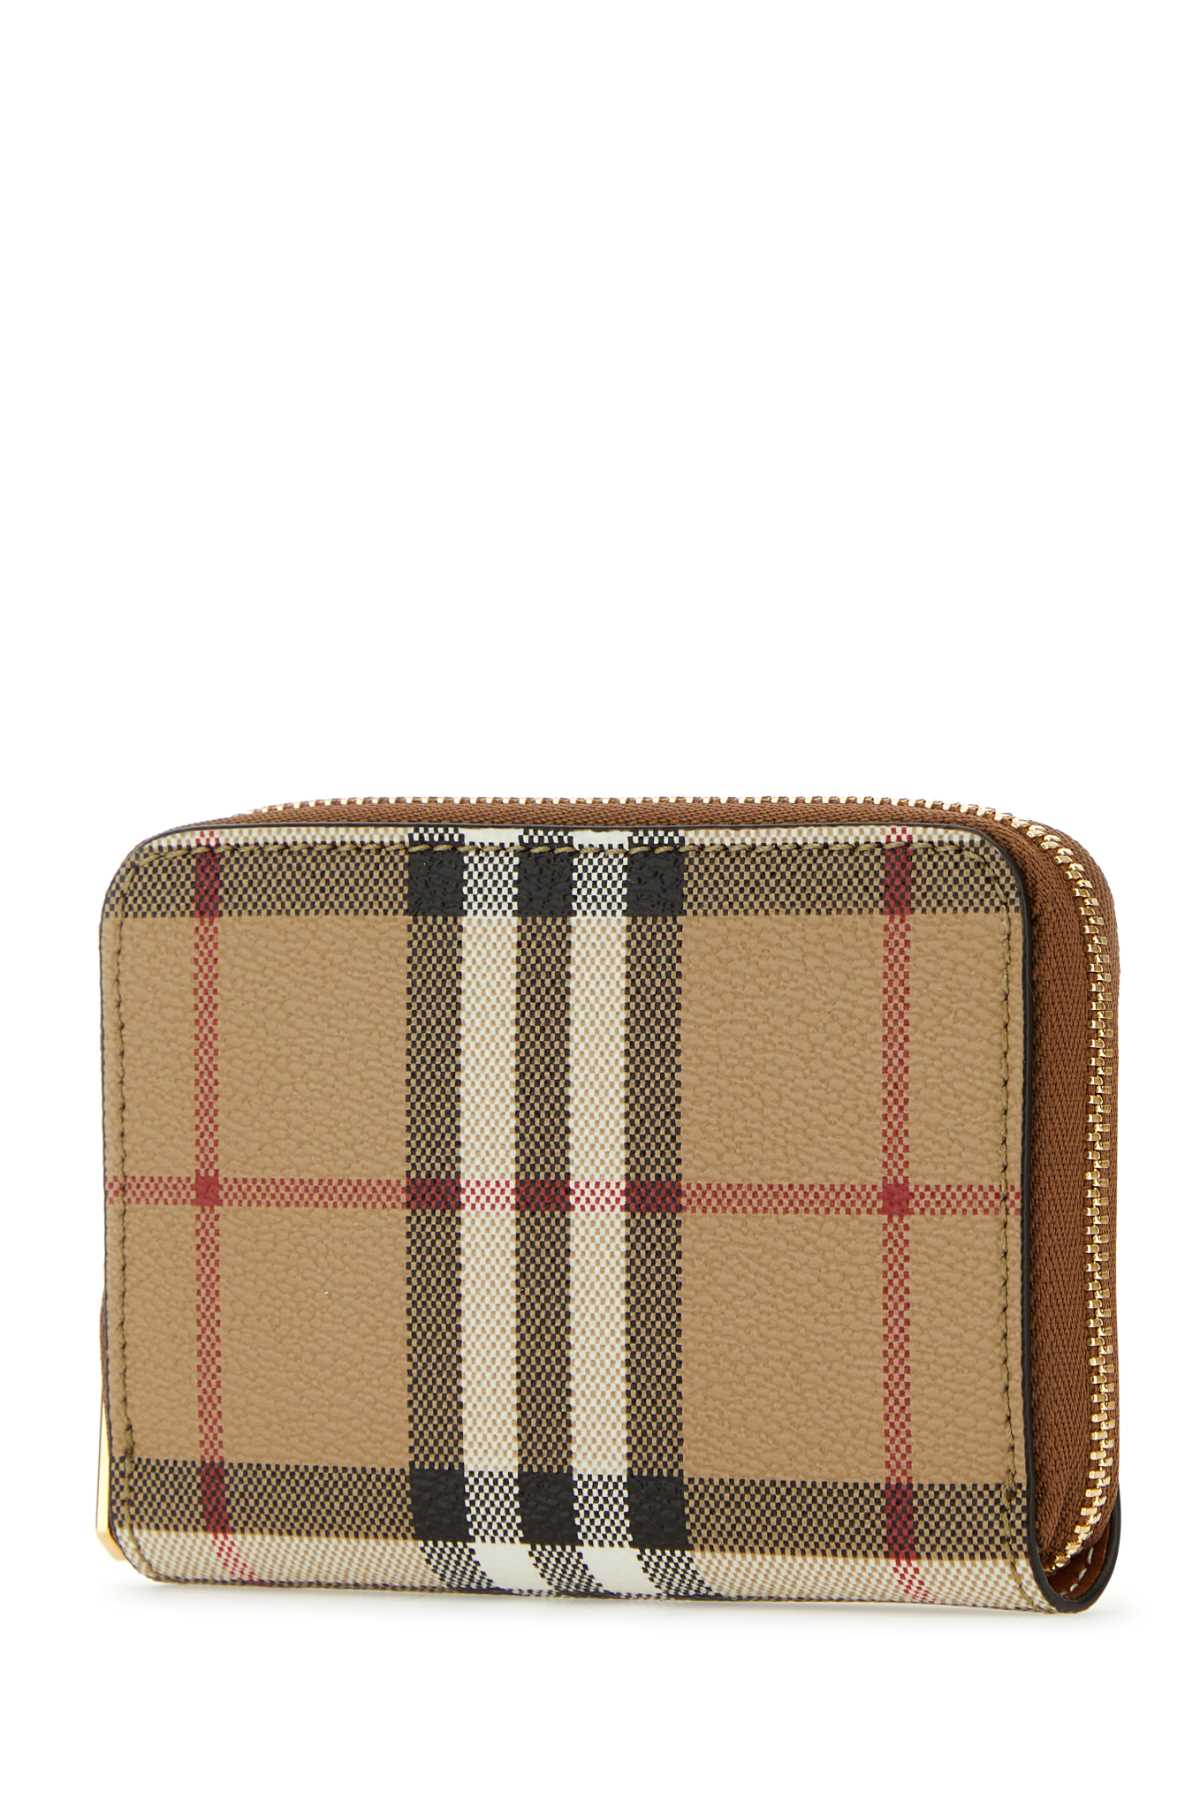 Burberry Printed E-canvas Wallet In Vintchckbrirbrown